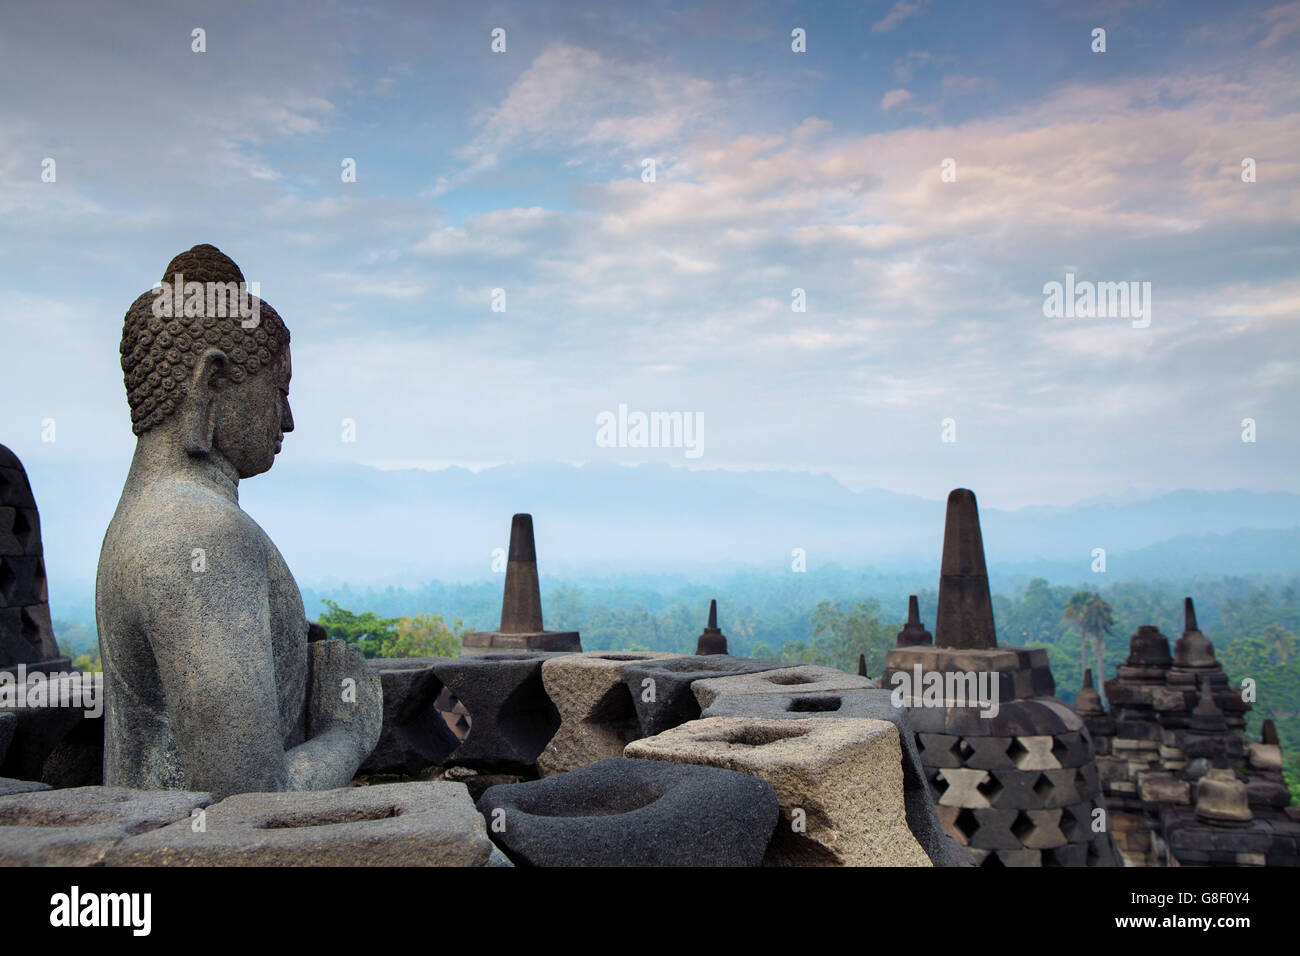 Borobudur World Heritage Site, a 9th-century Mahayana Buddhist Temple in Magelang, Central Java, Indonesia Stock Photo